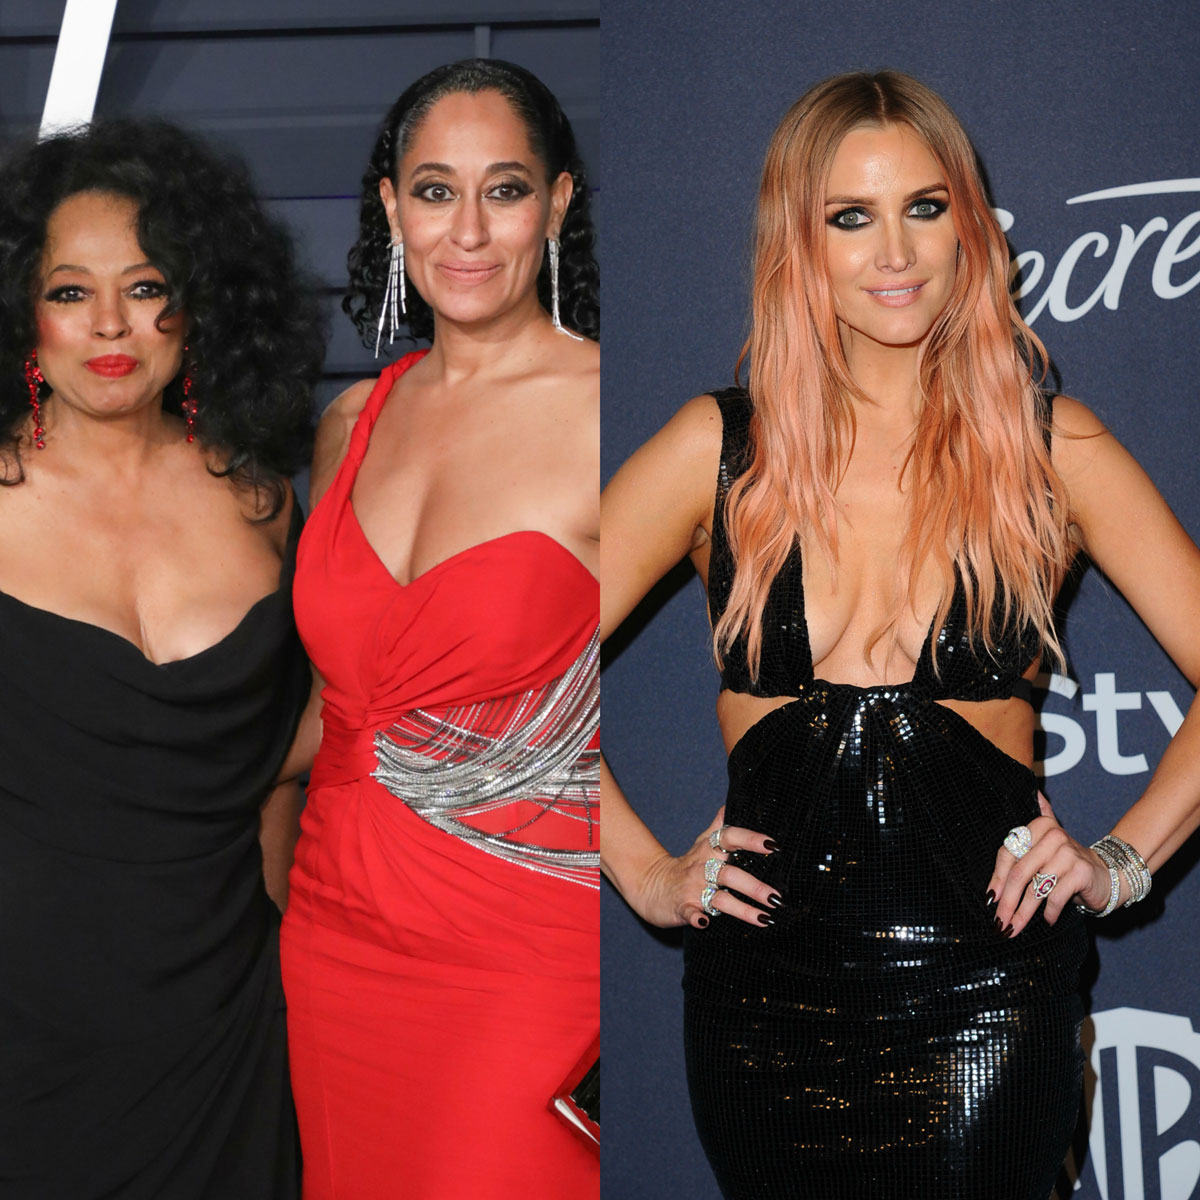 Diana Ross, Tracee Ellis Ross, and Ashlee Simpson are all related